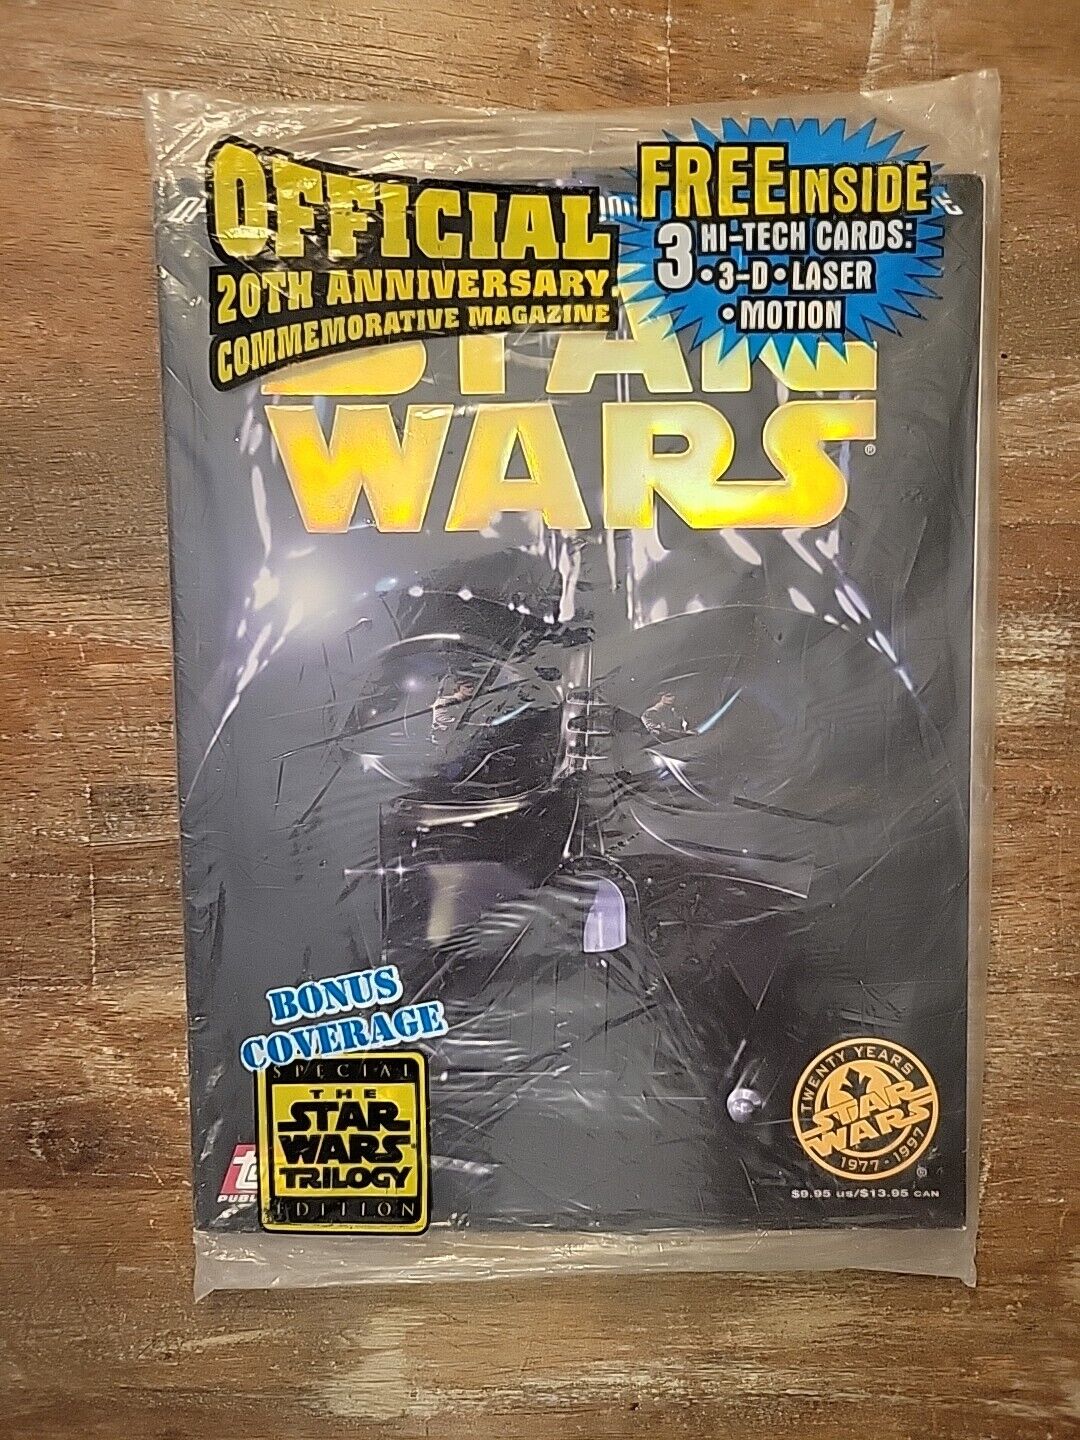 STAR WARS Vintage Official 20th Anniversary Commemorative Magazine Sealed